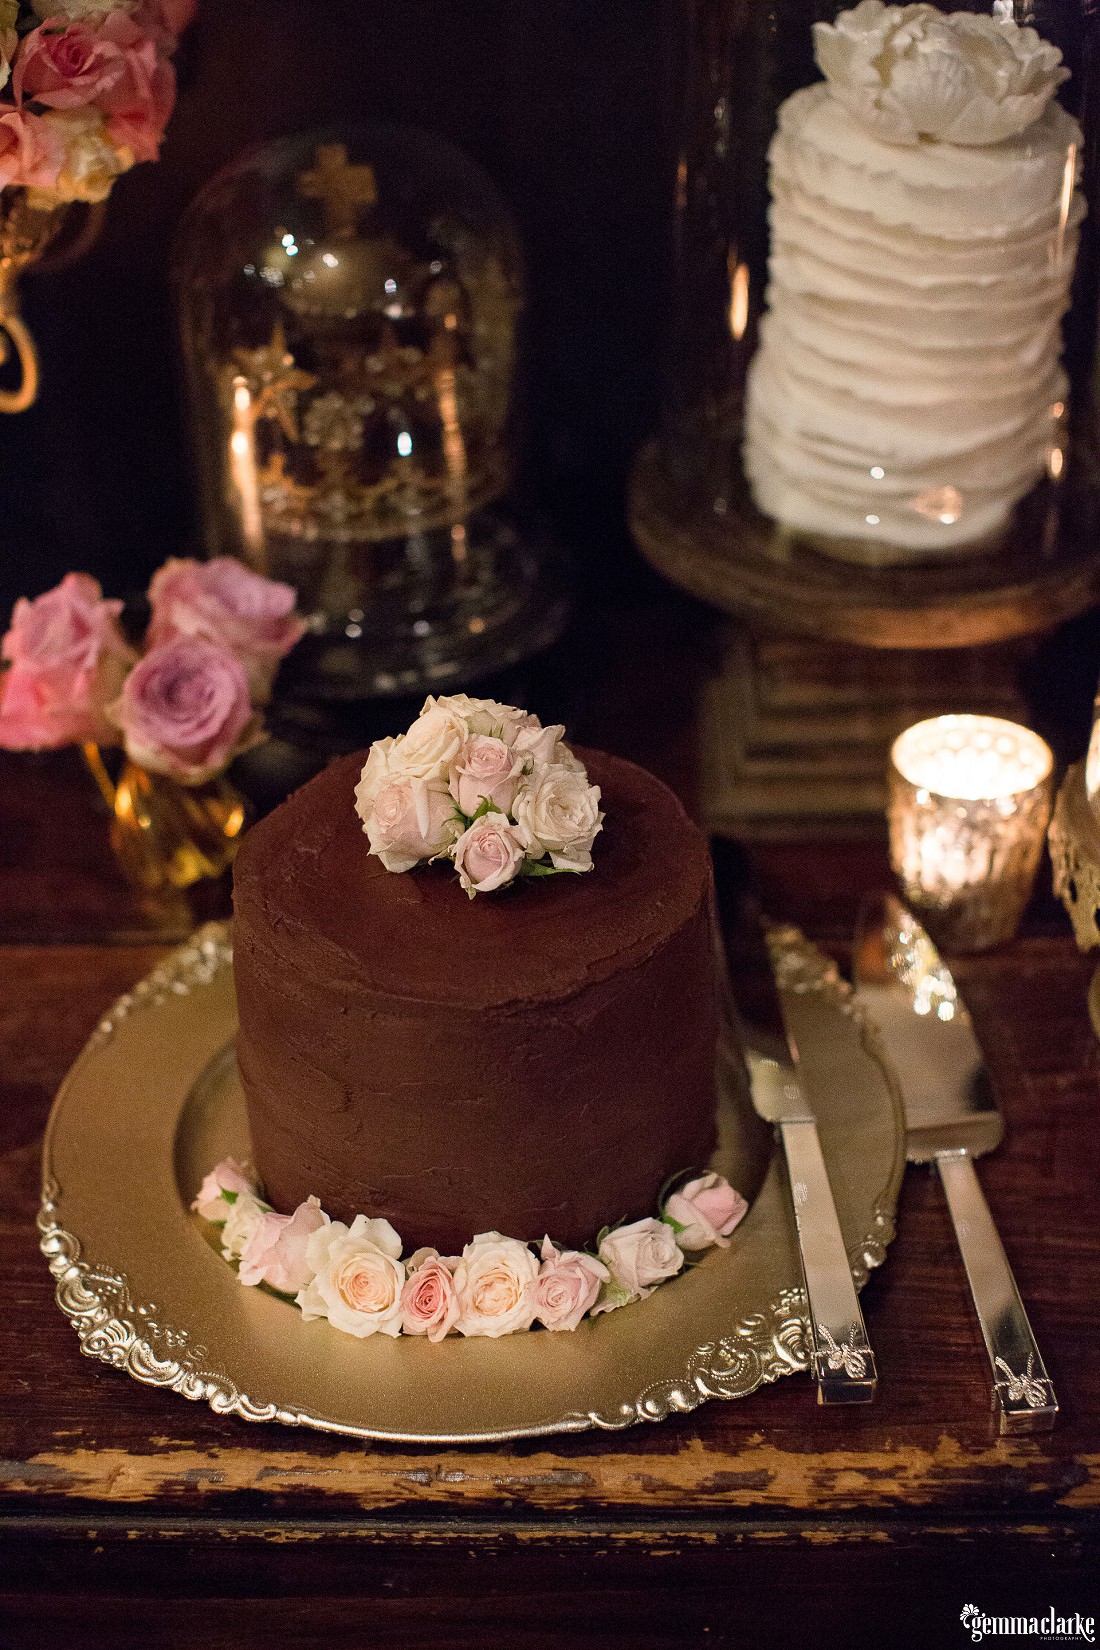 A single tier chocolate cake with floral decorations - Echoes Hotel Wedding